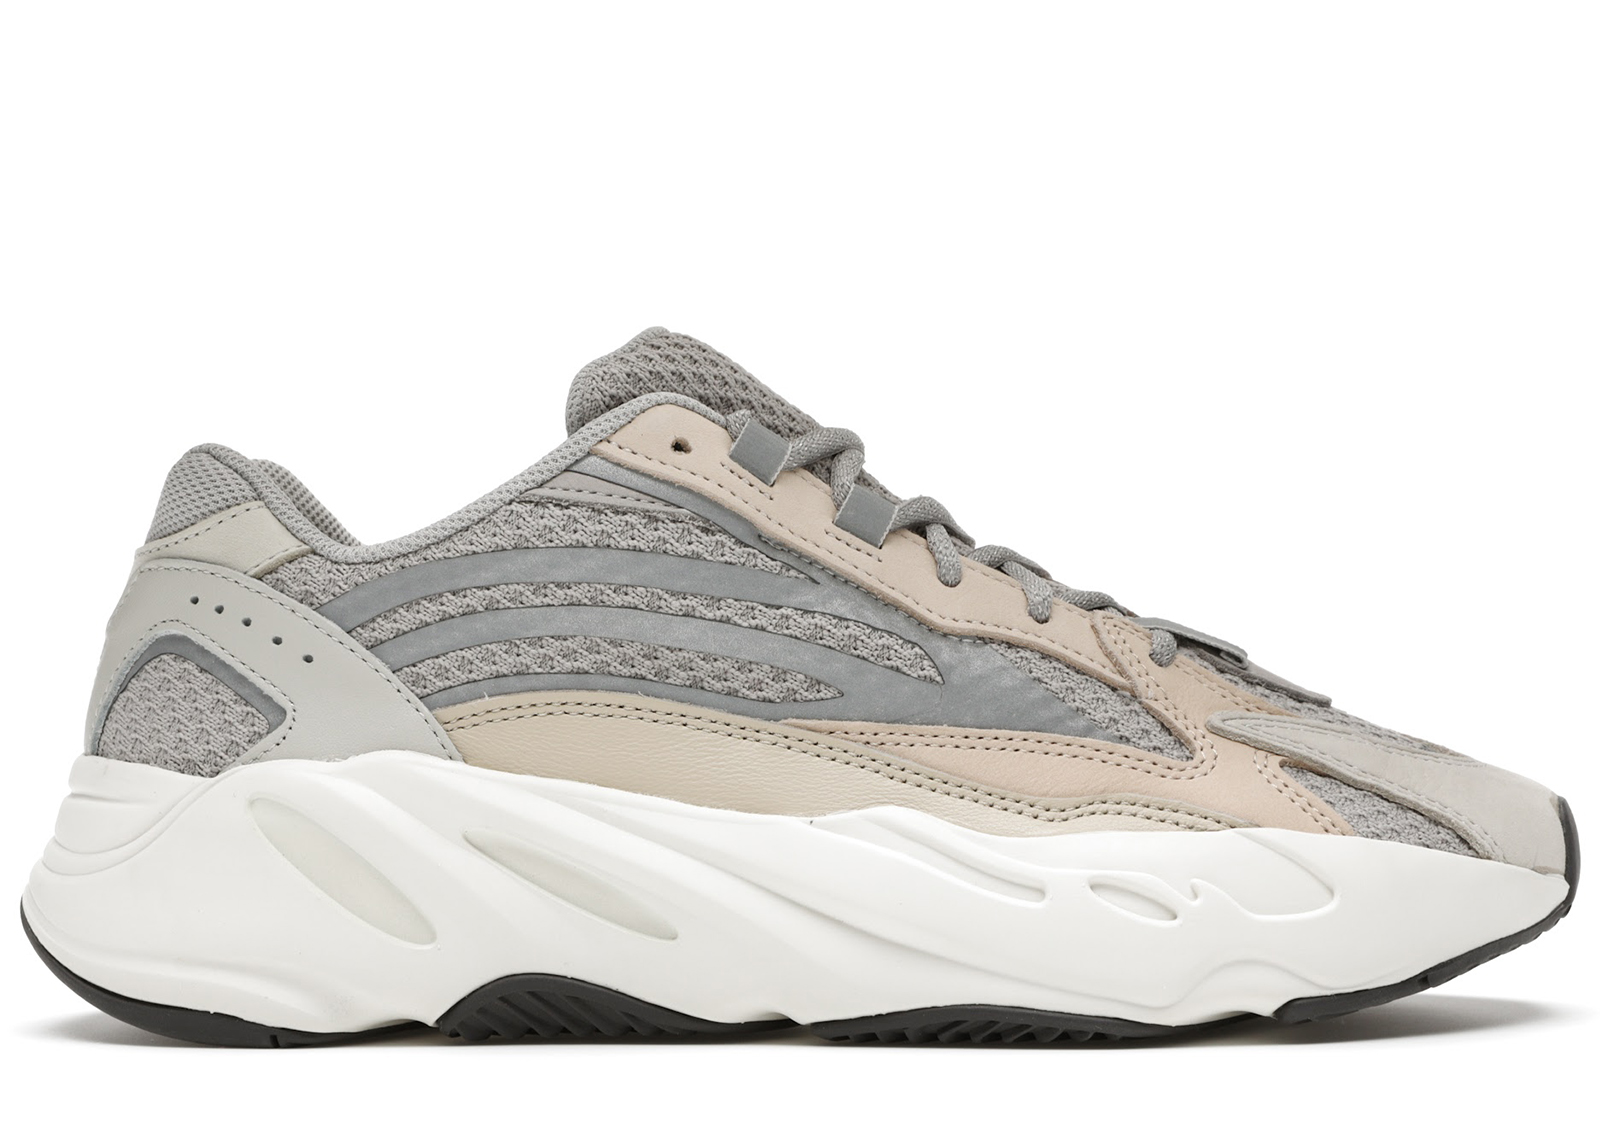 Buy Yeezy 700 v2 Shoes & New Sneakers - StockX